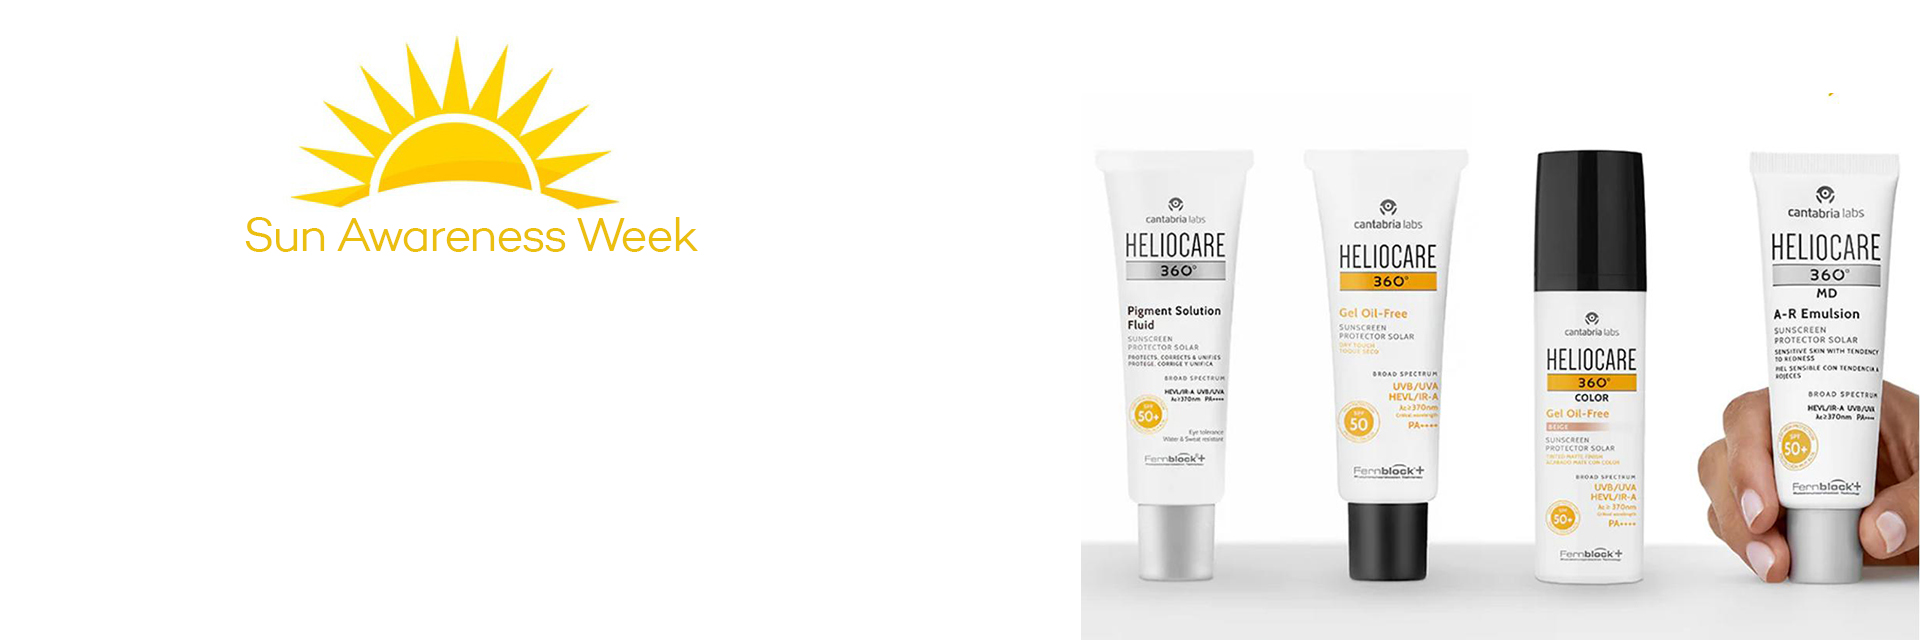 10% OFF HELIOCARE 360